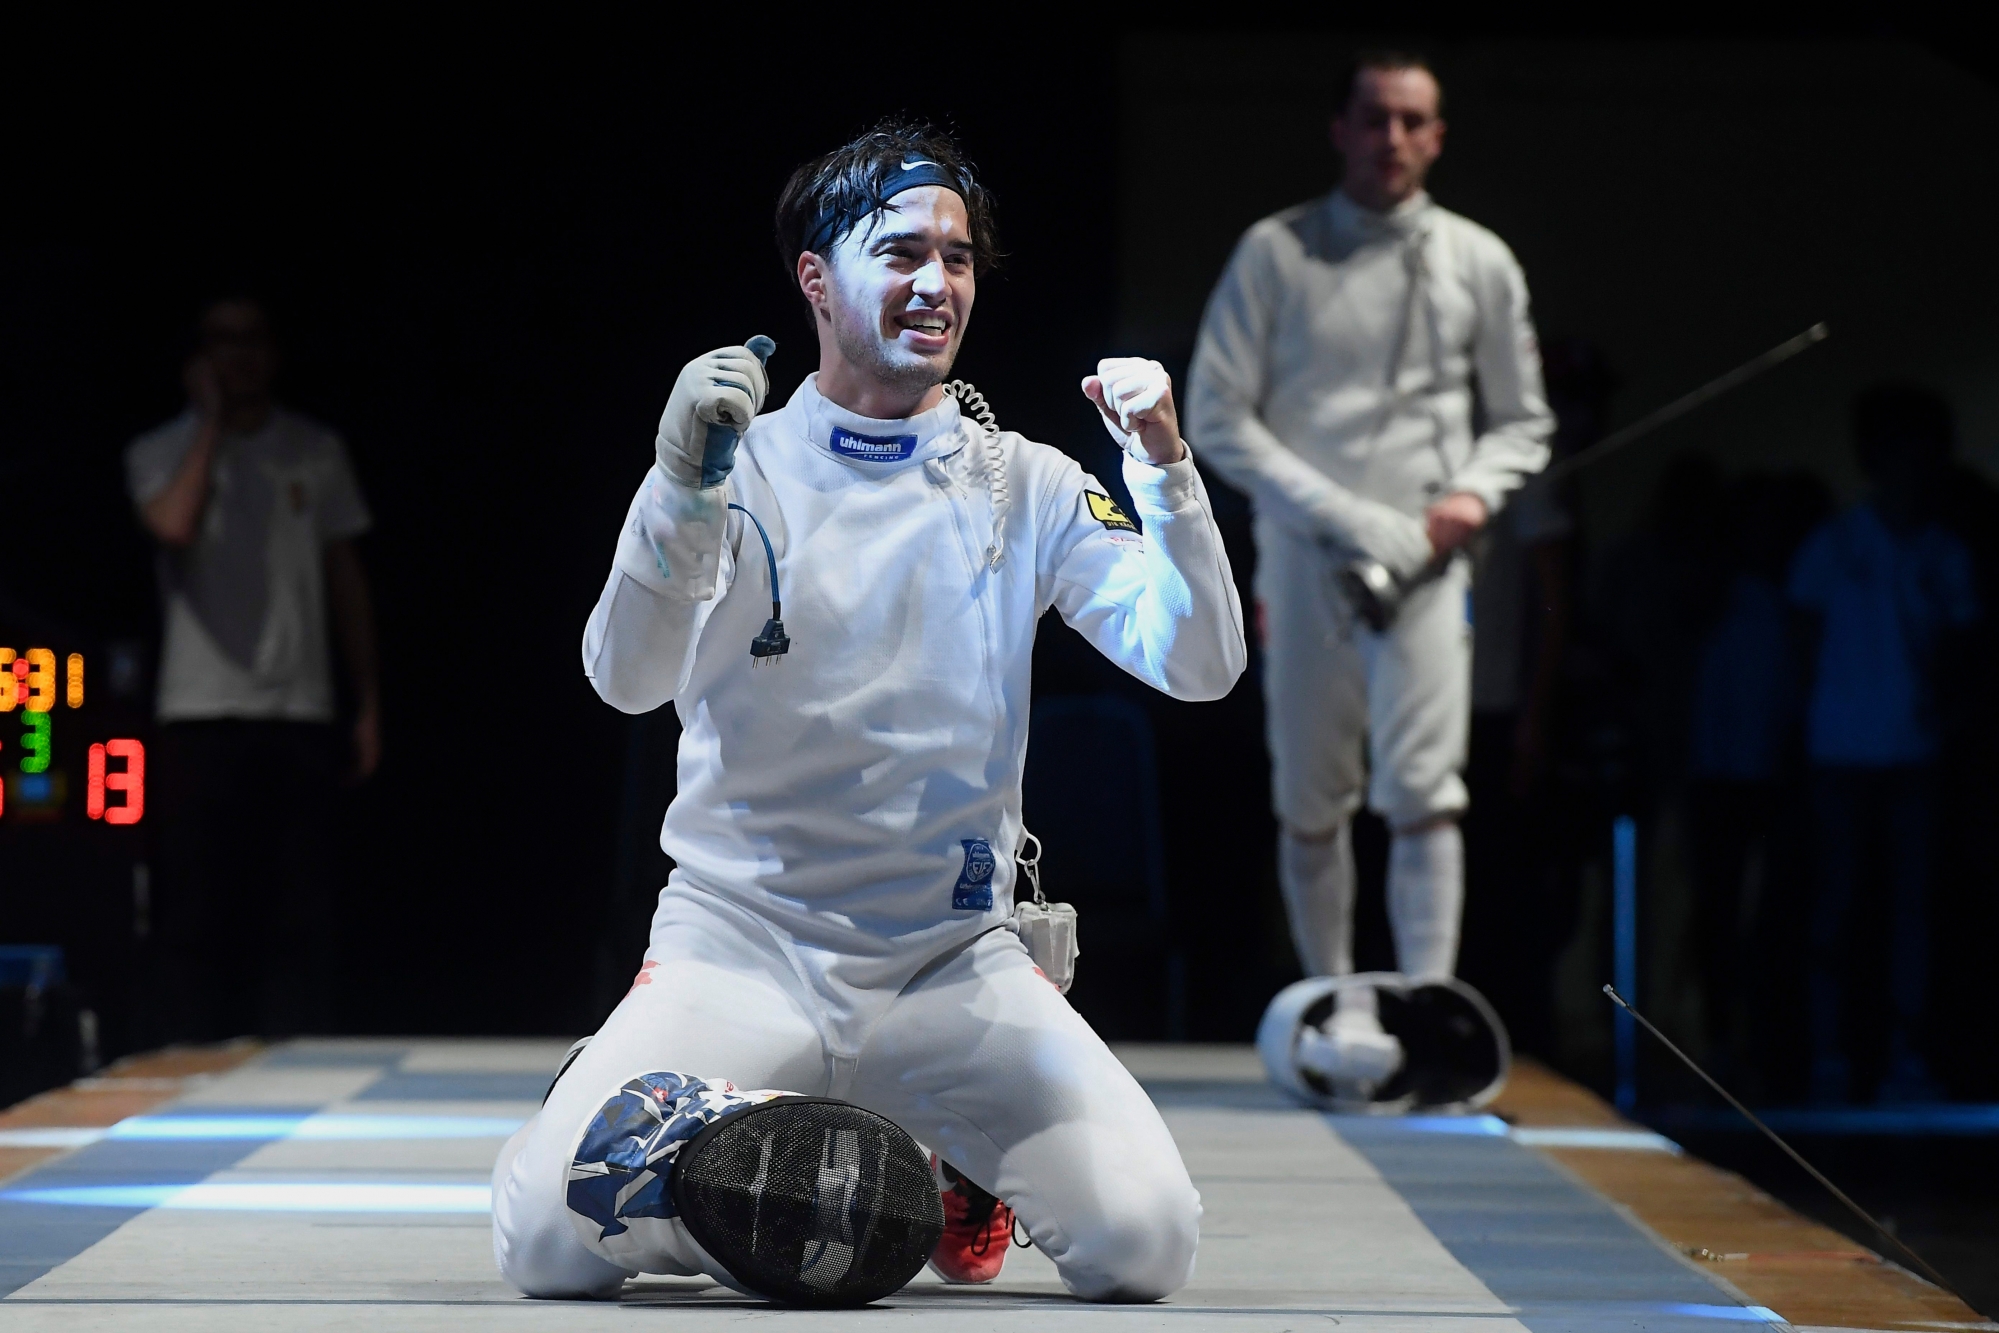 Max Heinzer of Switzerland celebrates his victory against Alex Fava of France at the end of the men's final round of the WestEnd Grand Prix of the Epee World Cup in MOM Sports Centre in Budapest, Hungary, Sunday, March 25, 2018. (Tamas Kovacs/MTI via AP) HUNGARY EPEE WORLD CUP